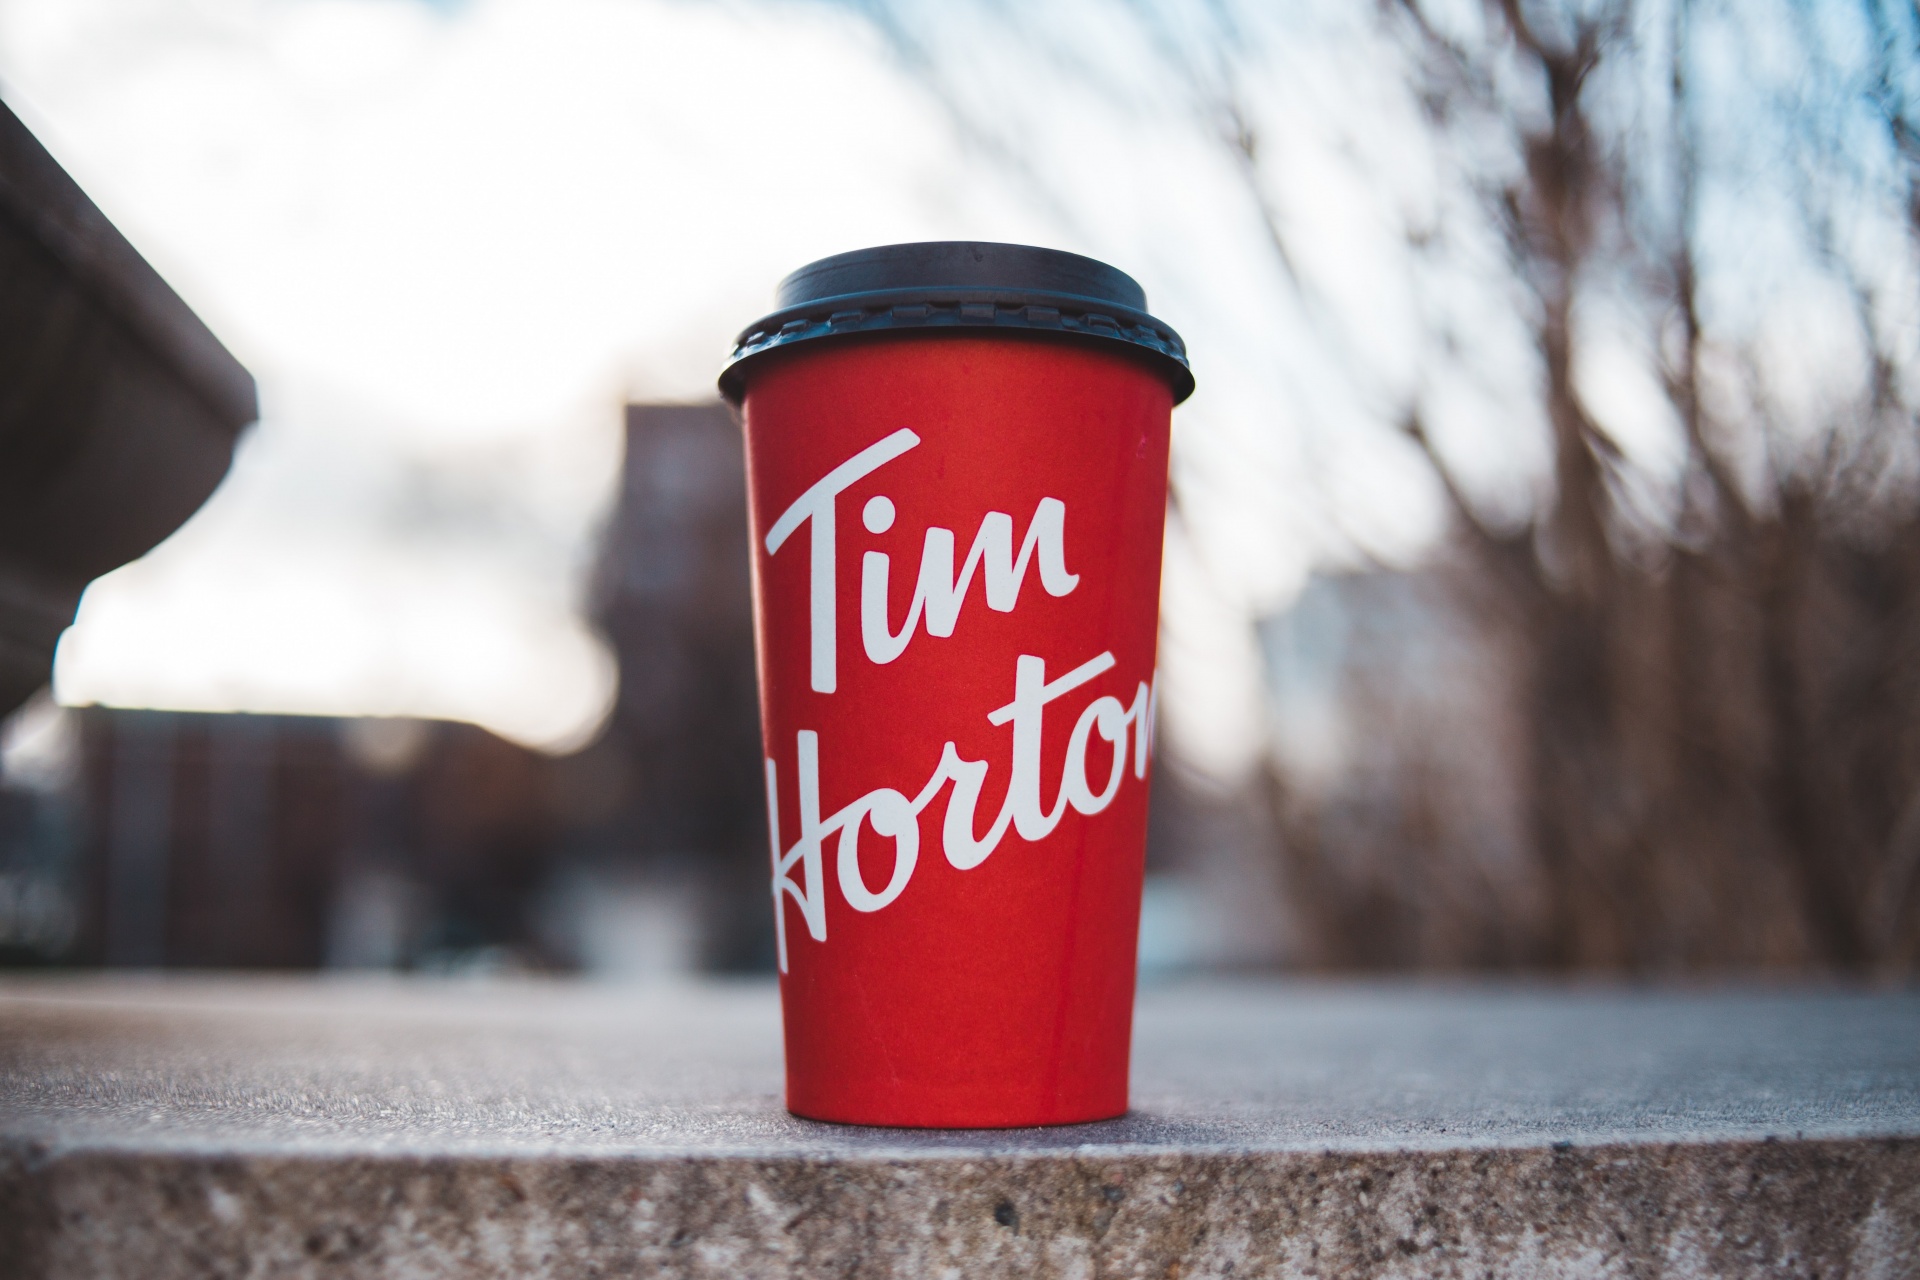 Canadian coffee chain Tim Hortons to expand in Southeast Asia